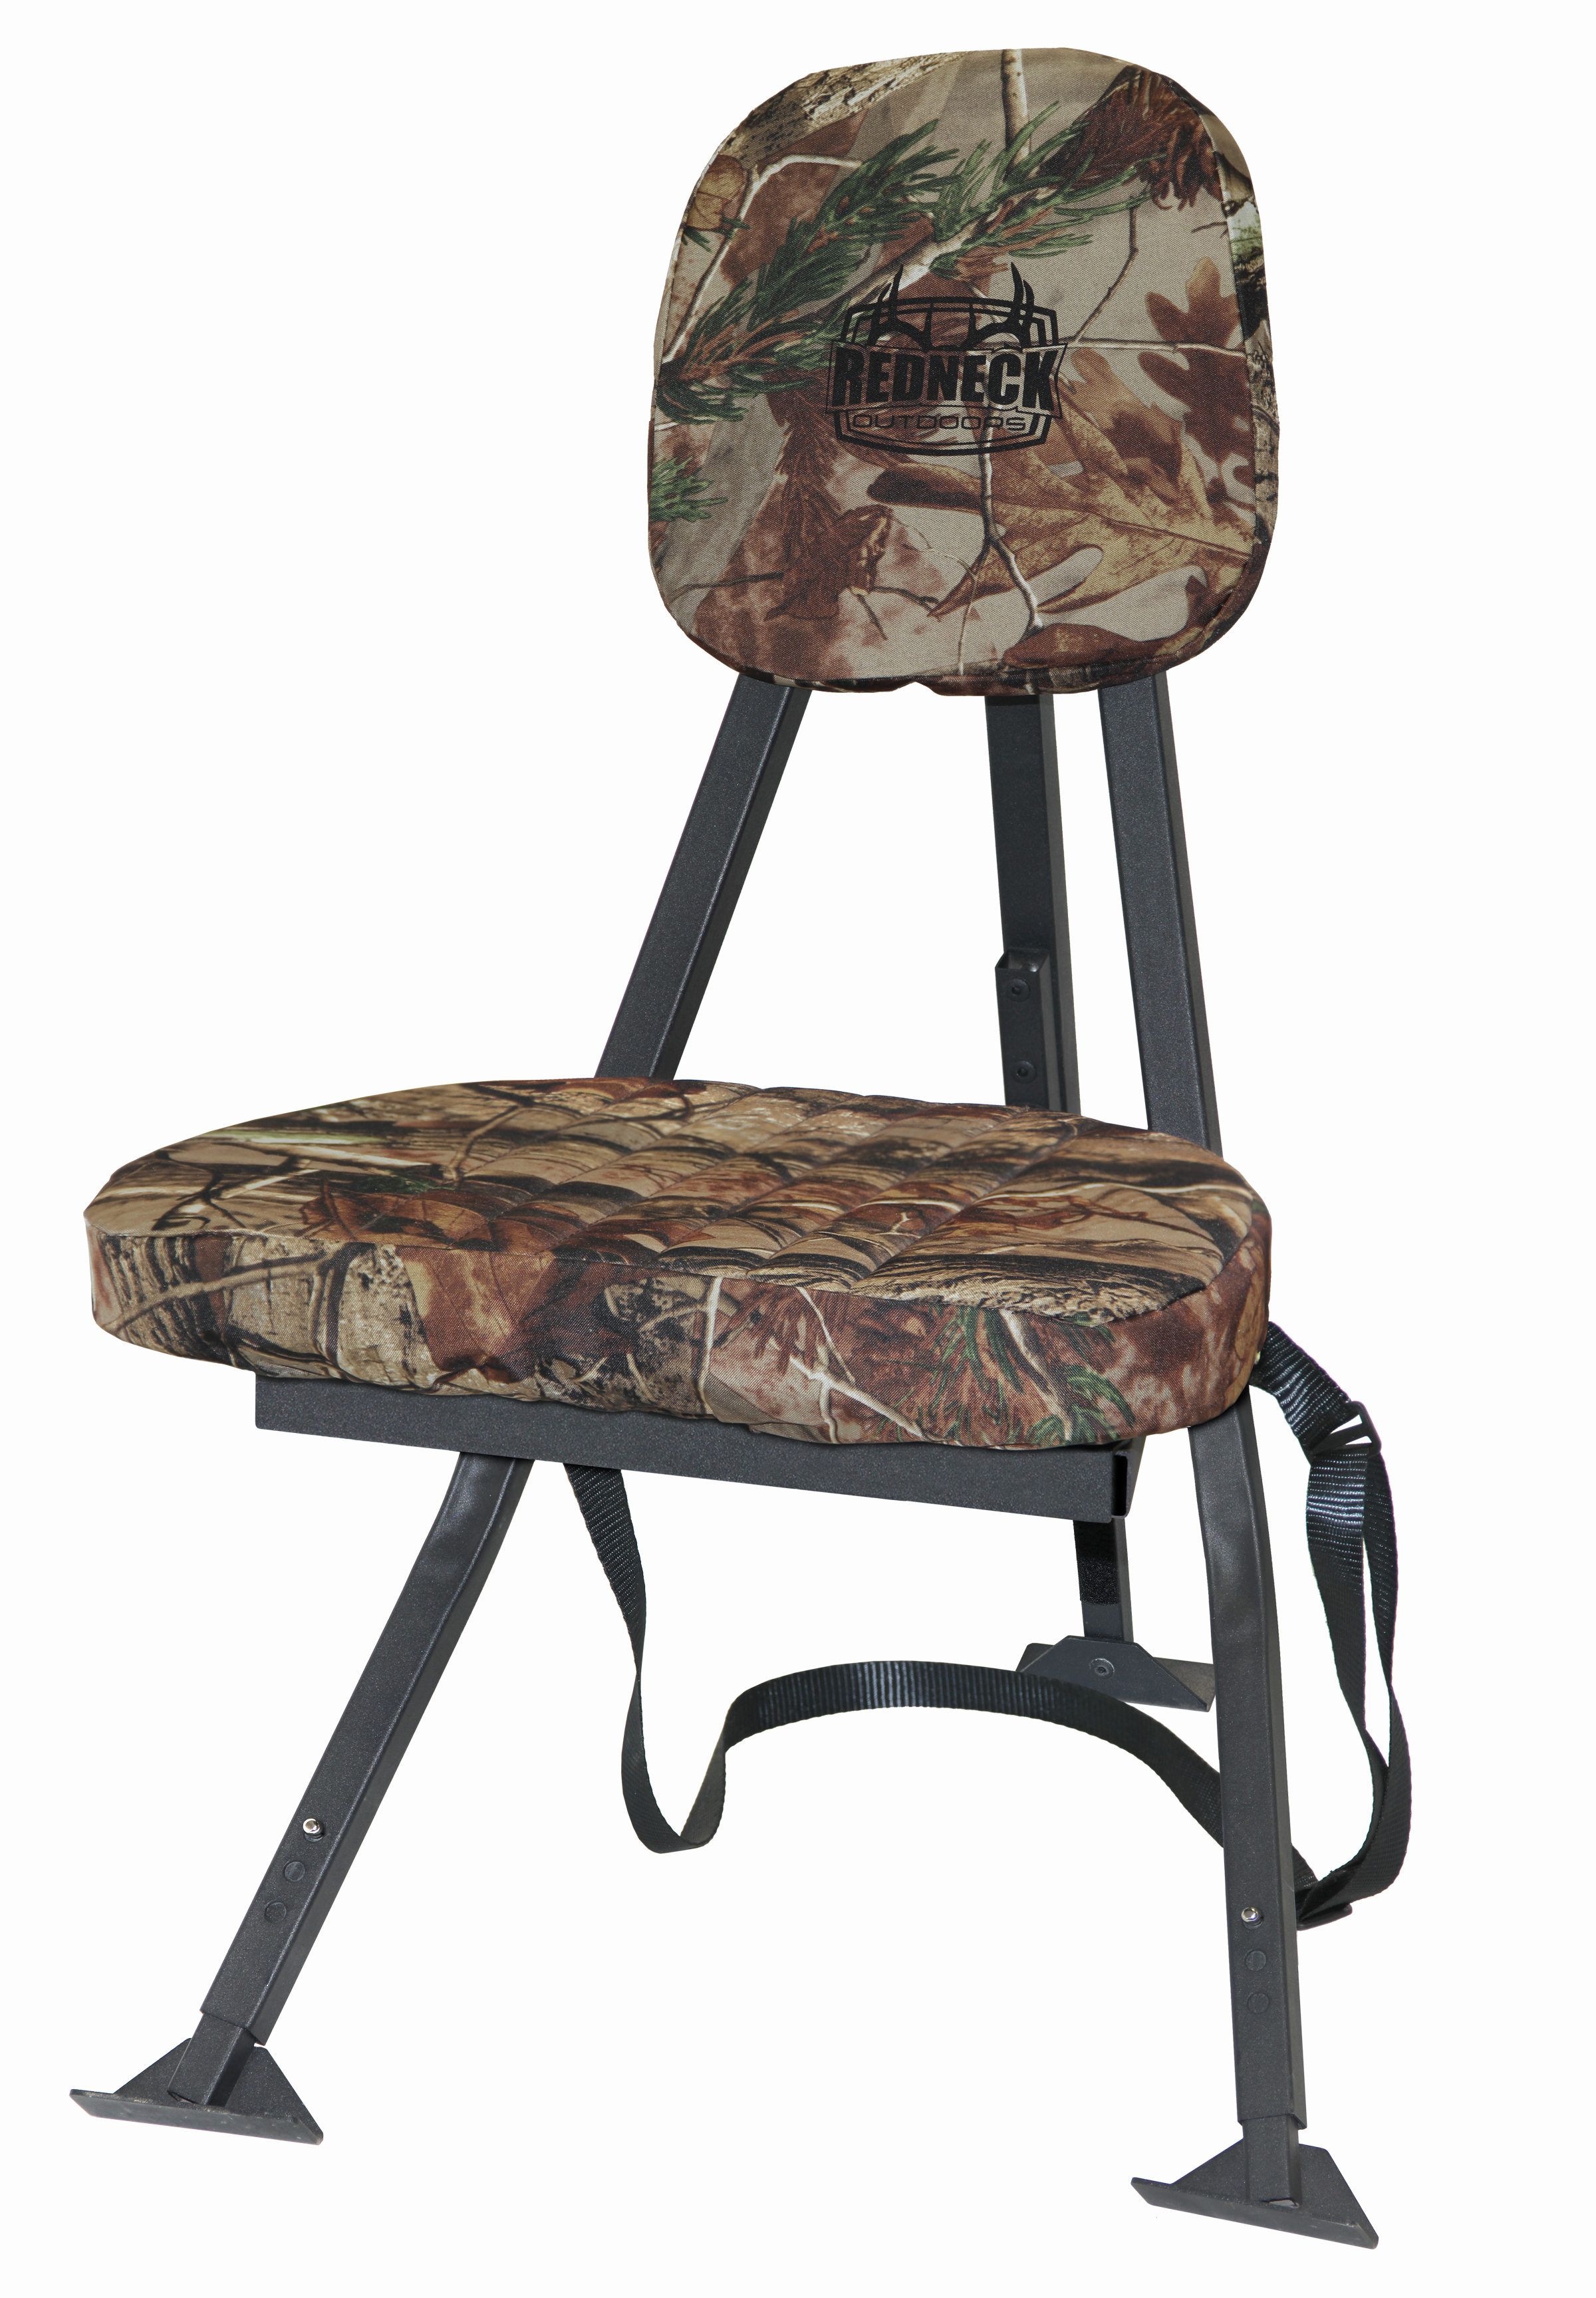 Redneck Outdoor Products Portable Hunting Chair